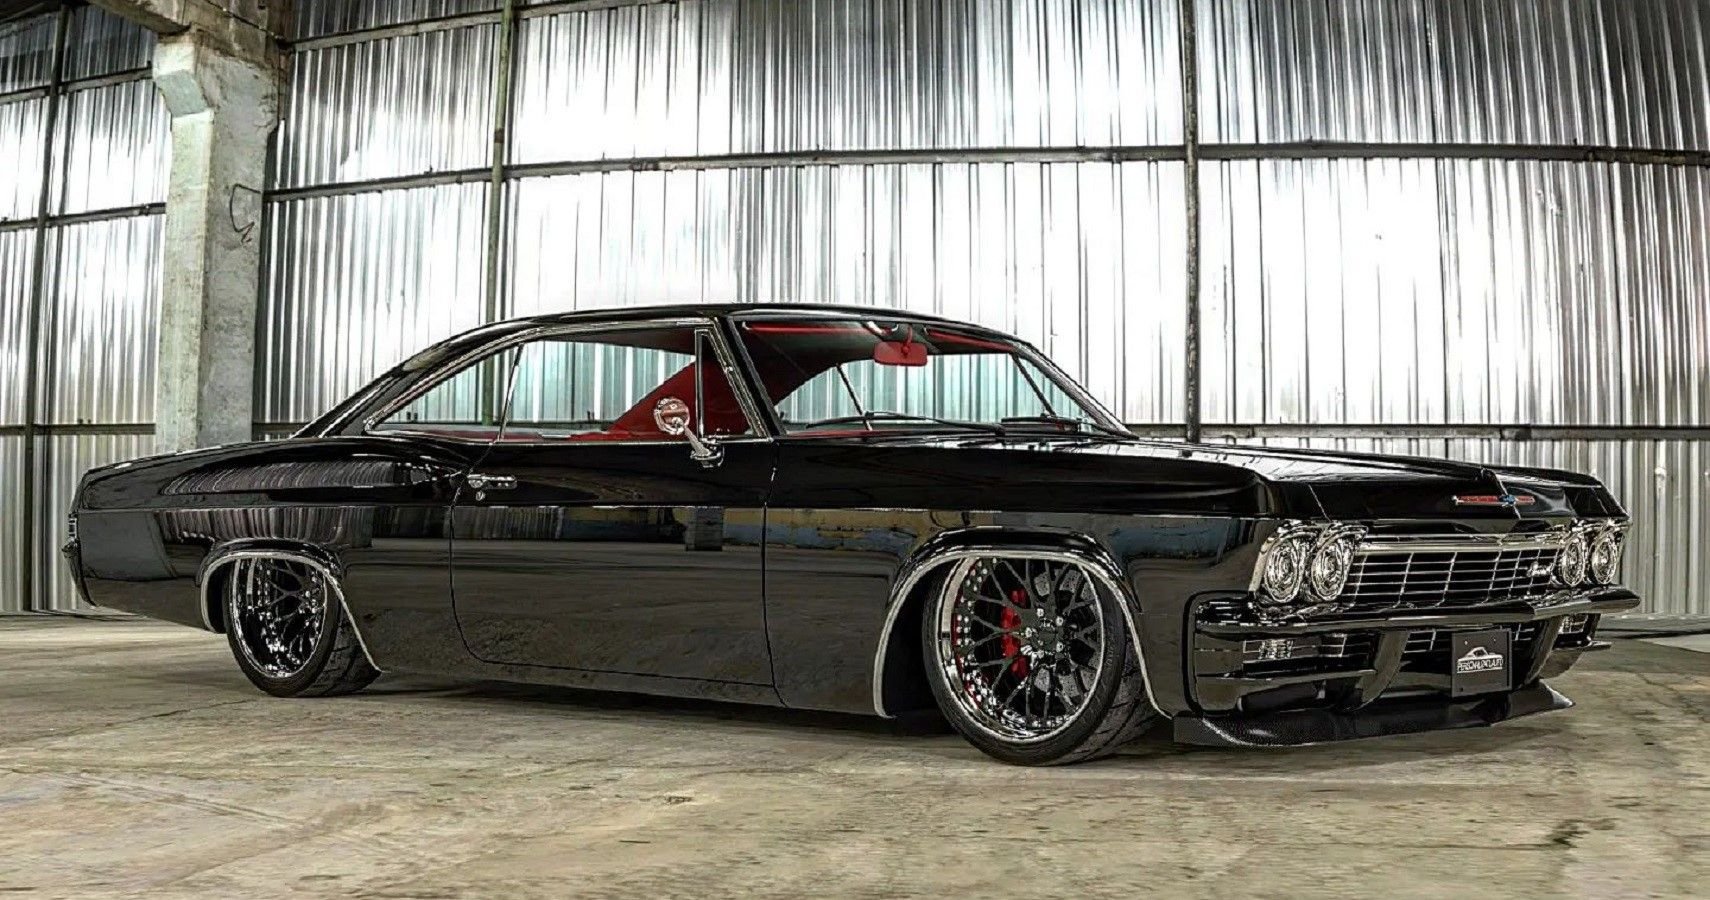 This Slammed 1965 Chevy Impala Brings Back Memories Of A Lost Automotive Era